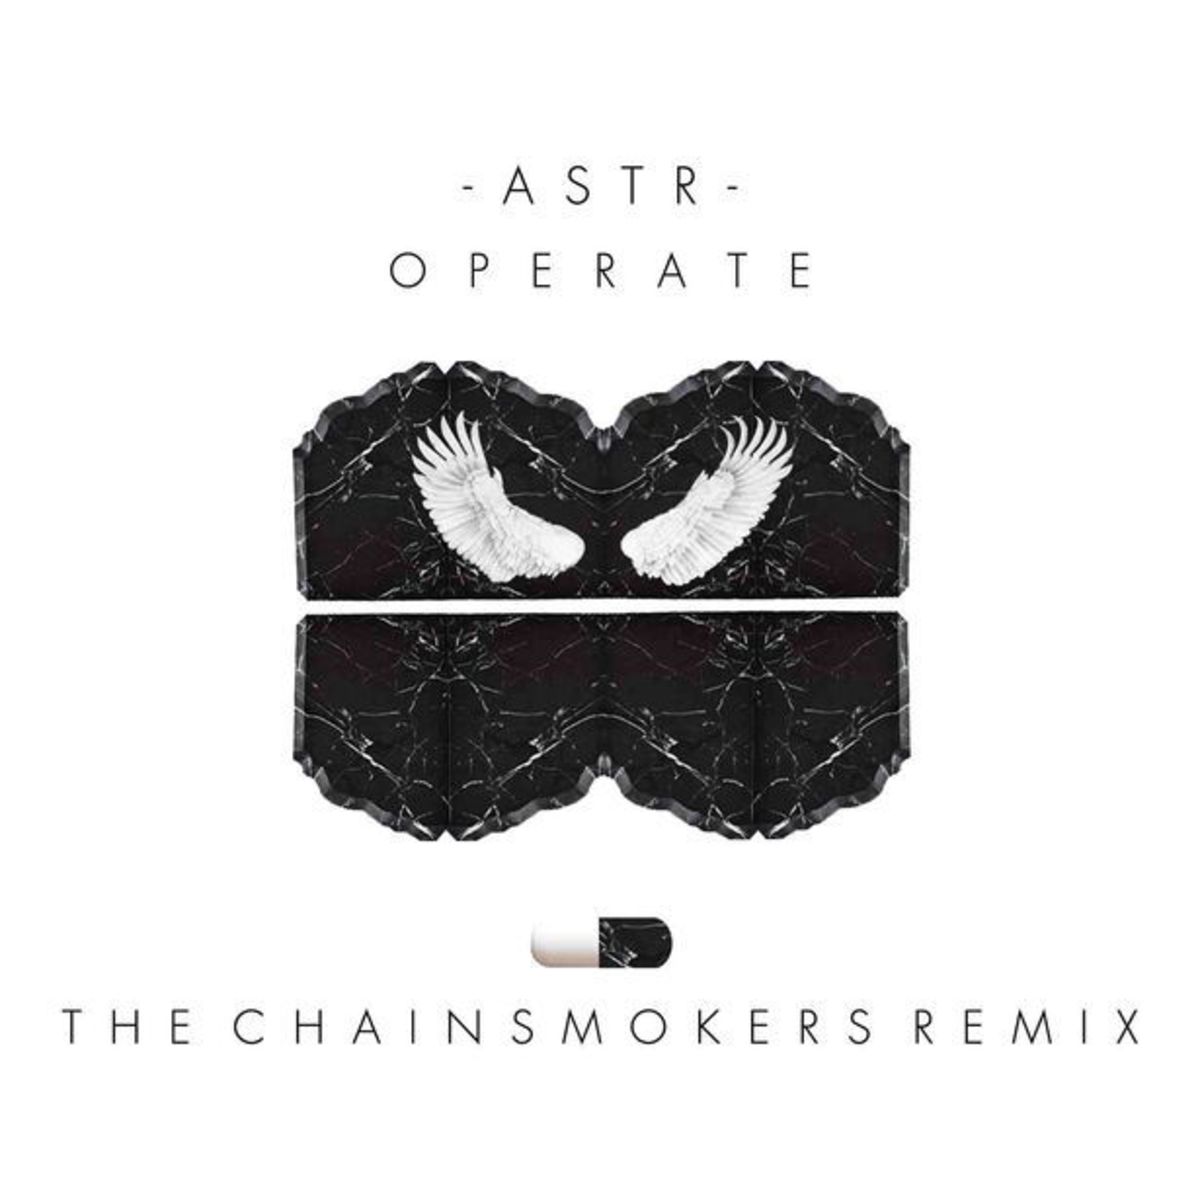 EDM Download: ASTR - OPERATE (THE CHAINSMOKERS REMIX)